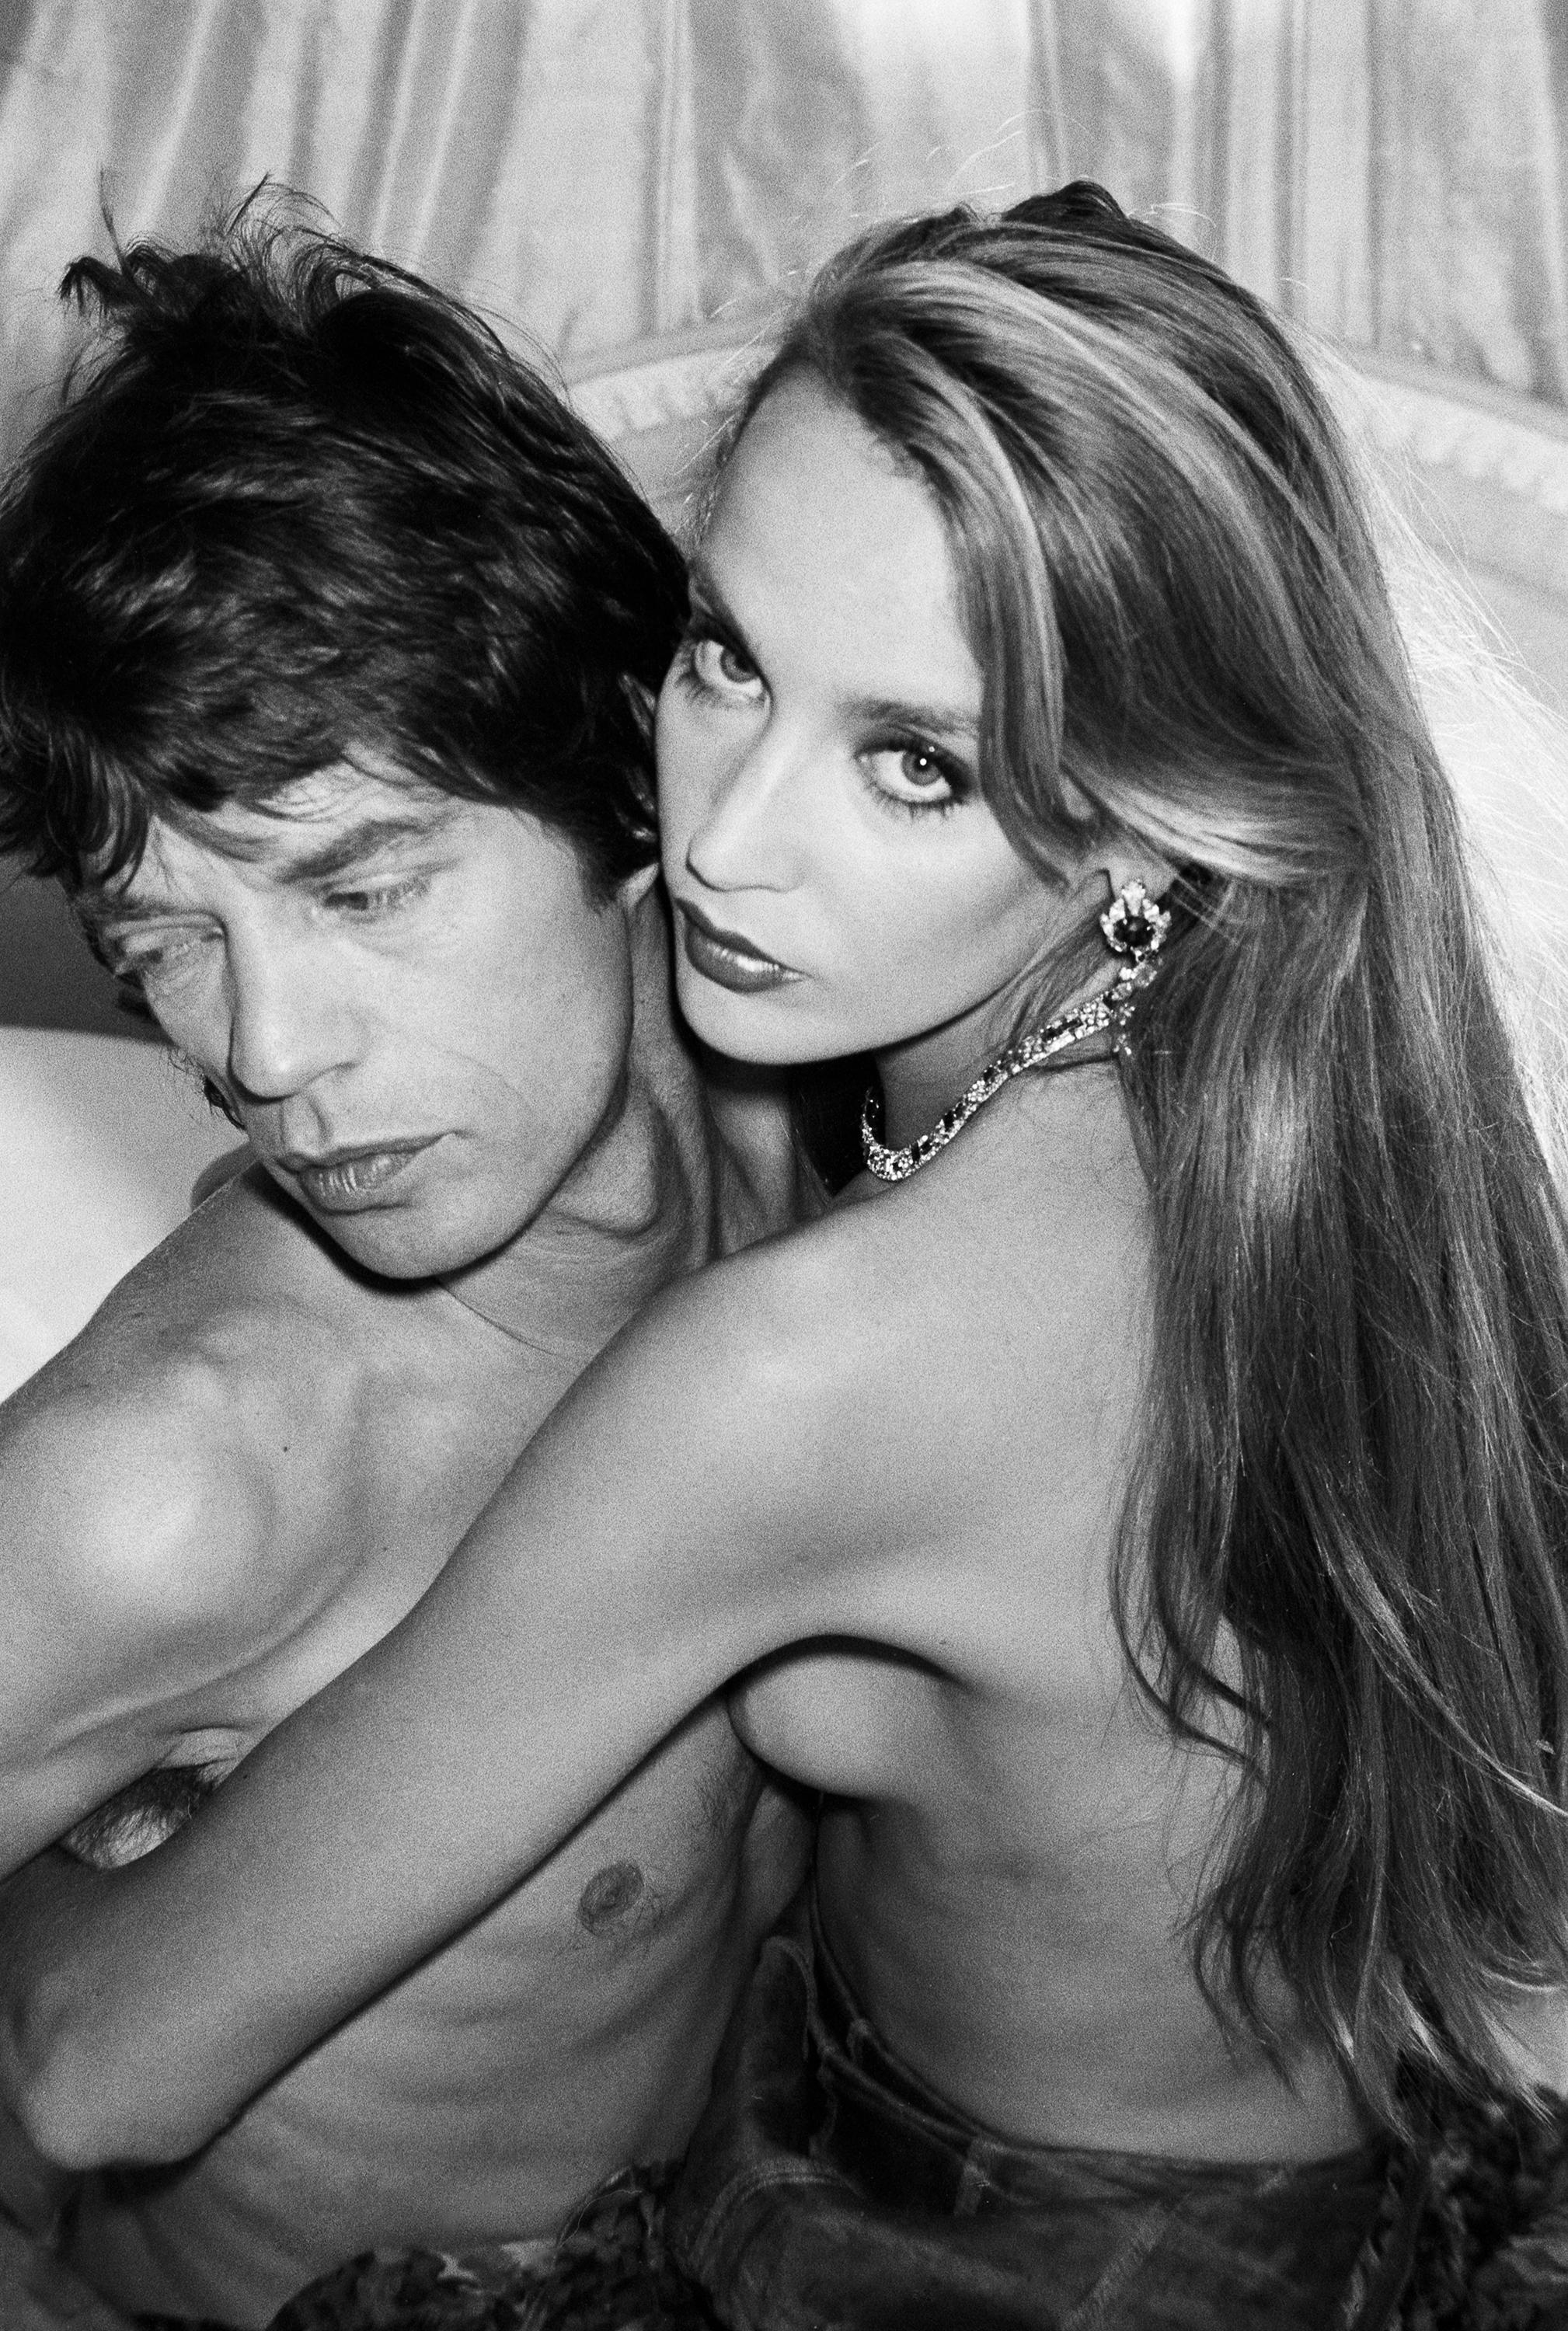 Norman Parkinson Portrait Photograph - Mick Jagger and Jerry Hall